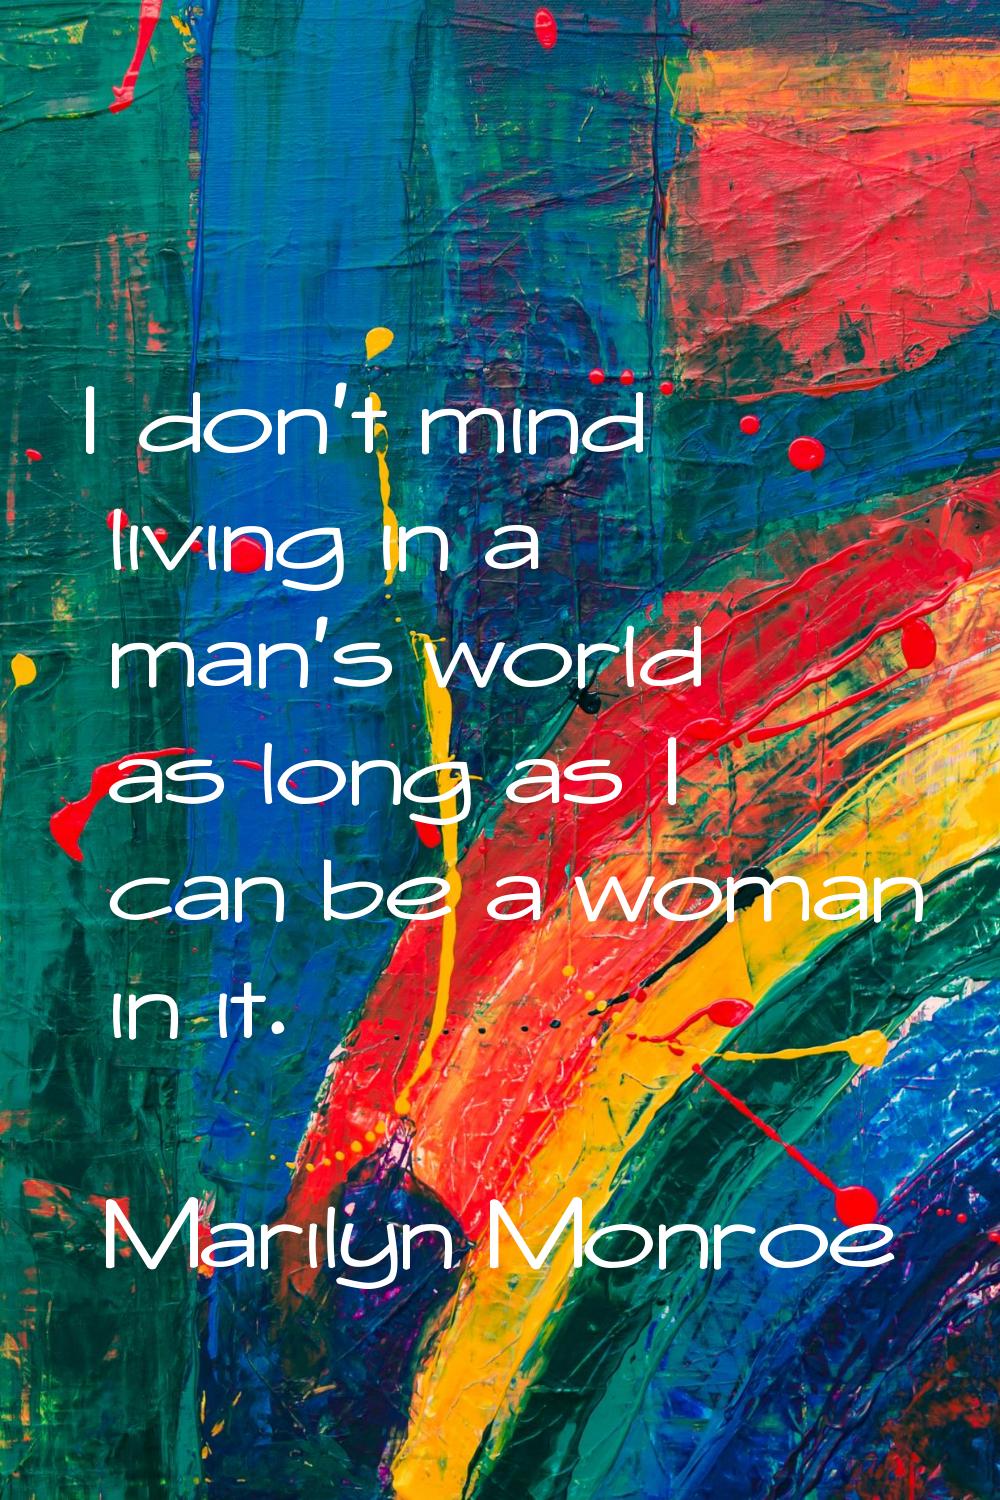 I don't mind living in a man's world as long as I can be a woman in it.